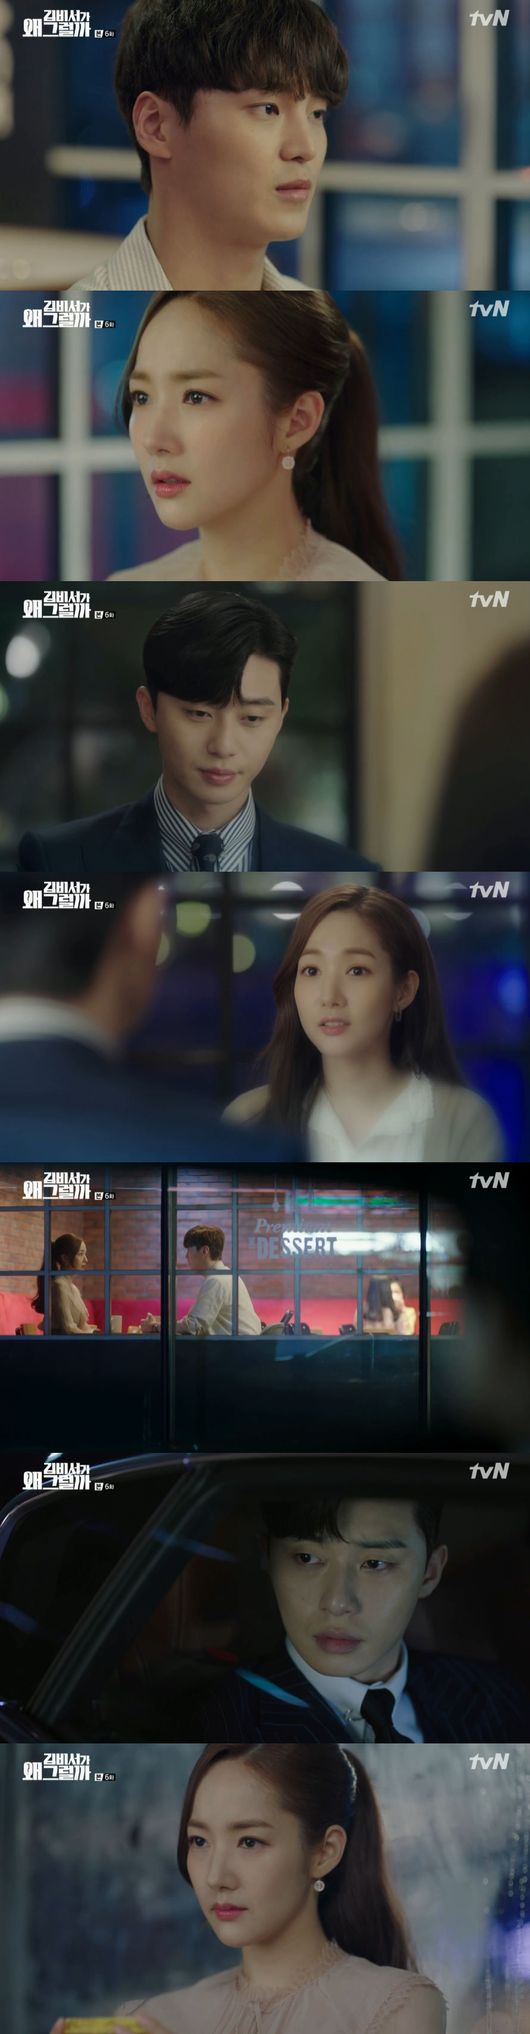 Lee Tae-hwan is expected to become a villa that blocks the love of Park Seo-joon and Park Min-young.In the 6th episode of the drama Why is Secretary Kim doing that (played by Baek Sun-woo, Choi Bo-rim, directed by Park Joon-hwa), which was broadcast on the afternoon of the 21st, questions were raised about Lee Sung-yeons actions.This is the memory of the role of the brother that Kim Mi-so was looking for, not the character of Park Seo-joon.Smile had a past where he was trapped in a house when he was a child. While he was looking for his brother who was trapped together, he assumed that Young Jun, who he was performing, was the main character.The reason was that Young Jun was afraid of cable strings and had scars tied to something on his ankle.Its not a good thing, but it can be hurt, said the smile to Park Yoo-sik (Kang Ki-young). I am satisfied that I found a good brother.The smile became more and more confident as I got closer to Young Jun. I am going to do anything as much as the vice chairman has been a force for me.I am so glad to meet you again, and I am sorry to find out late. So Young-joon liked to think that smile was getting worse.However, Sung Yeon said, I do not have a good memory of being kidnapped. I have been in a bad relationship since I was a child.Then, in the fourth grade of elementary school, Young Jun was in the same class because he was overthrown. He made my friends on his side with his smart head, and he took sides with them and bothered me.One day, Young Jun took him to the redevelopment area, and he was abducted while waiting for Young Jun. This was a completely contrary claim to what Young Jun had said.Young-joon said that he was bullied by the friends of the sex, including the sex, and the smile was confused.The brother in his memory clearly introduced it as Lee Sung Yeon.While one of them is lying, viewers who smiled at the romance of smile and Young Jun are suspicious of the words of the castle.Sung-yeon is a best-selling author and is working under the pseudonym Morpheus. Although there is a past that has been suffering from complexions compared to Young-joon, he is now armed with a friendly face.He is showing a favorable feeling to the smile that is close to Young Jun.The sincerity of the castle is curious whether it is a lie of the castle to separate between Young Jun and the smile, what is the real face hidden behind the affection.Why would Secretary Kim do that? Capture the broadcast screen.